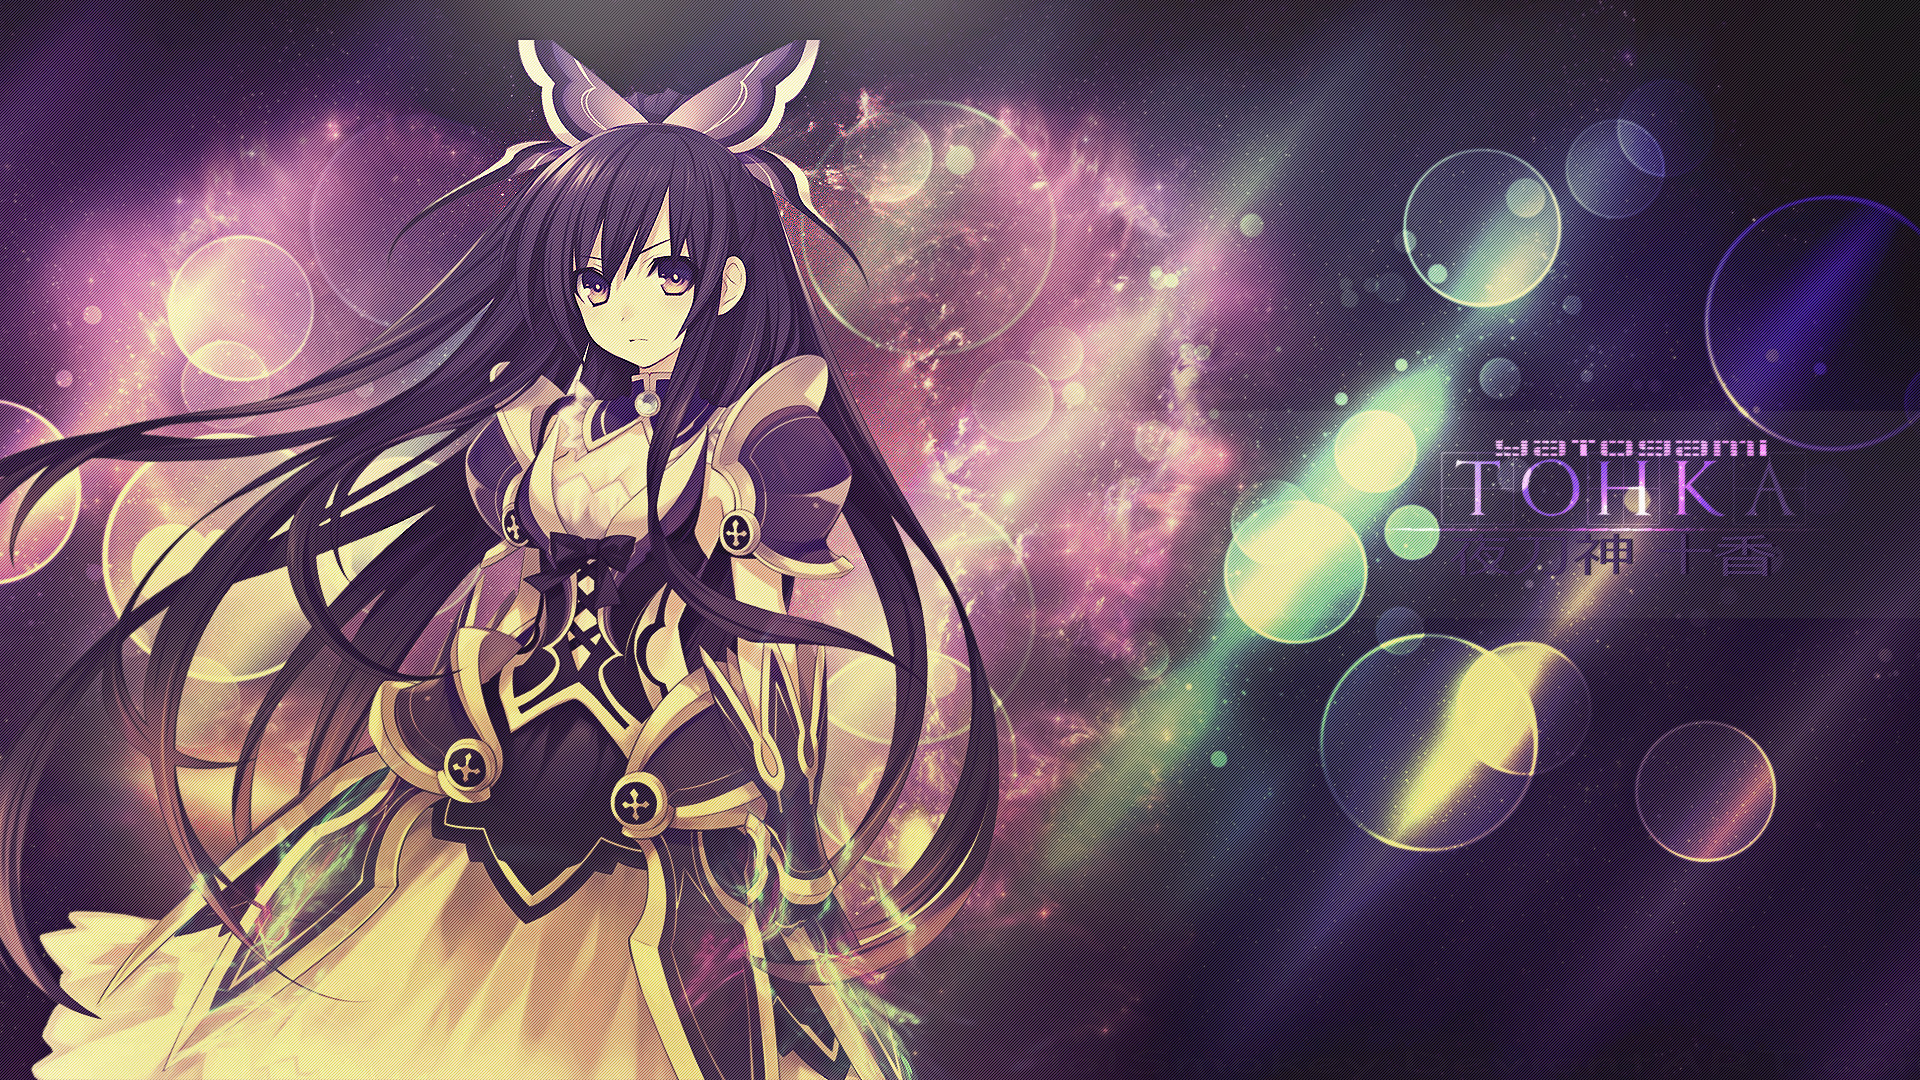 Tohka Date A Live HD Wallpaper From Gallsource.com